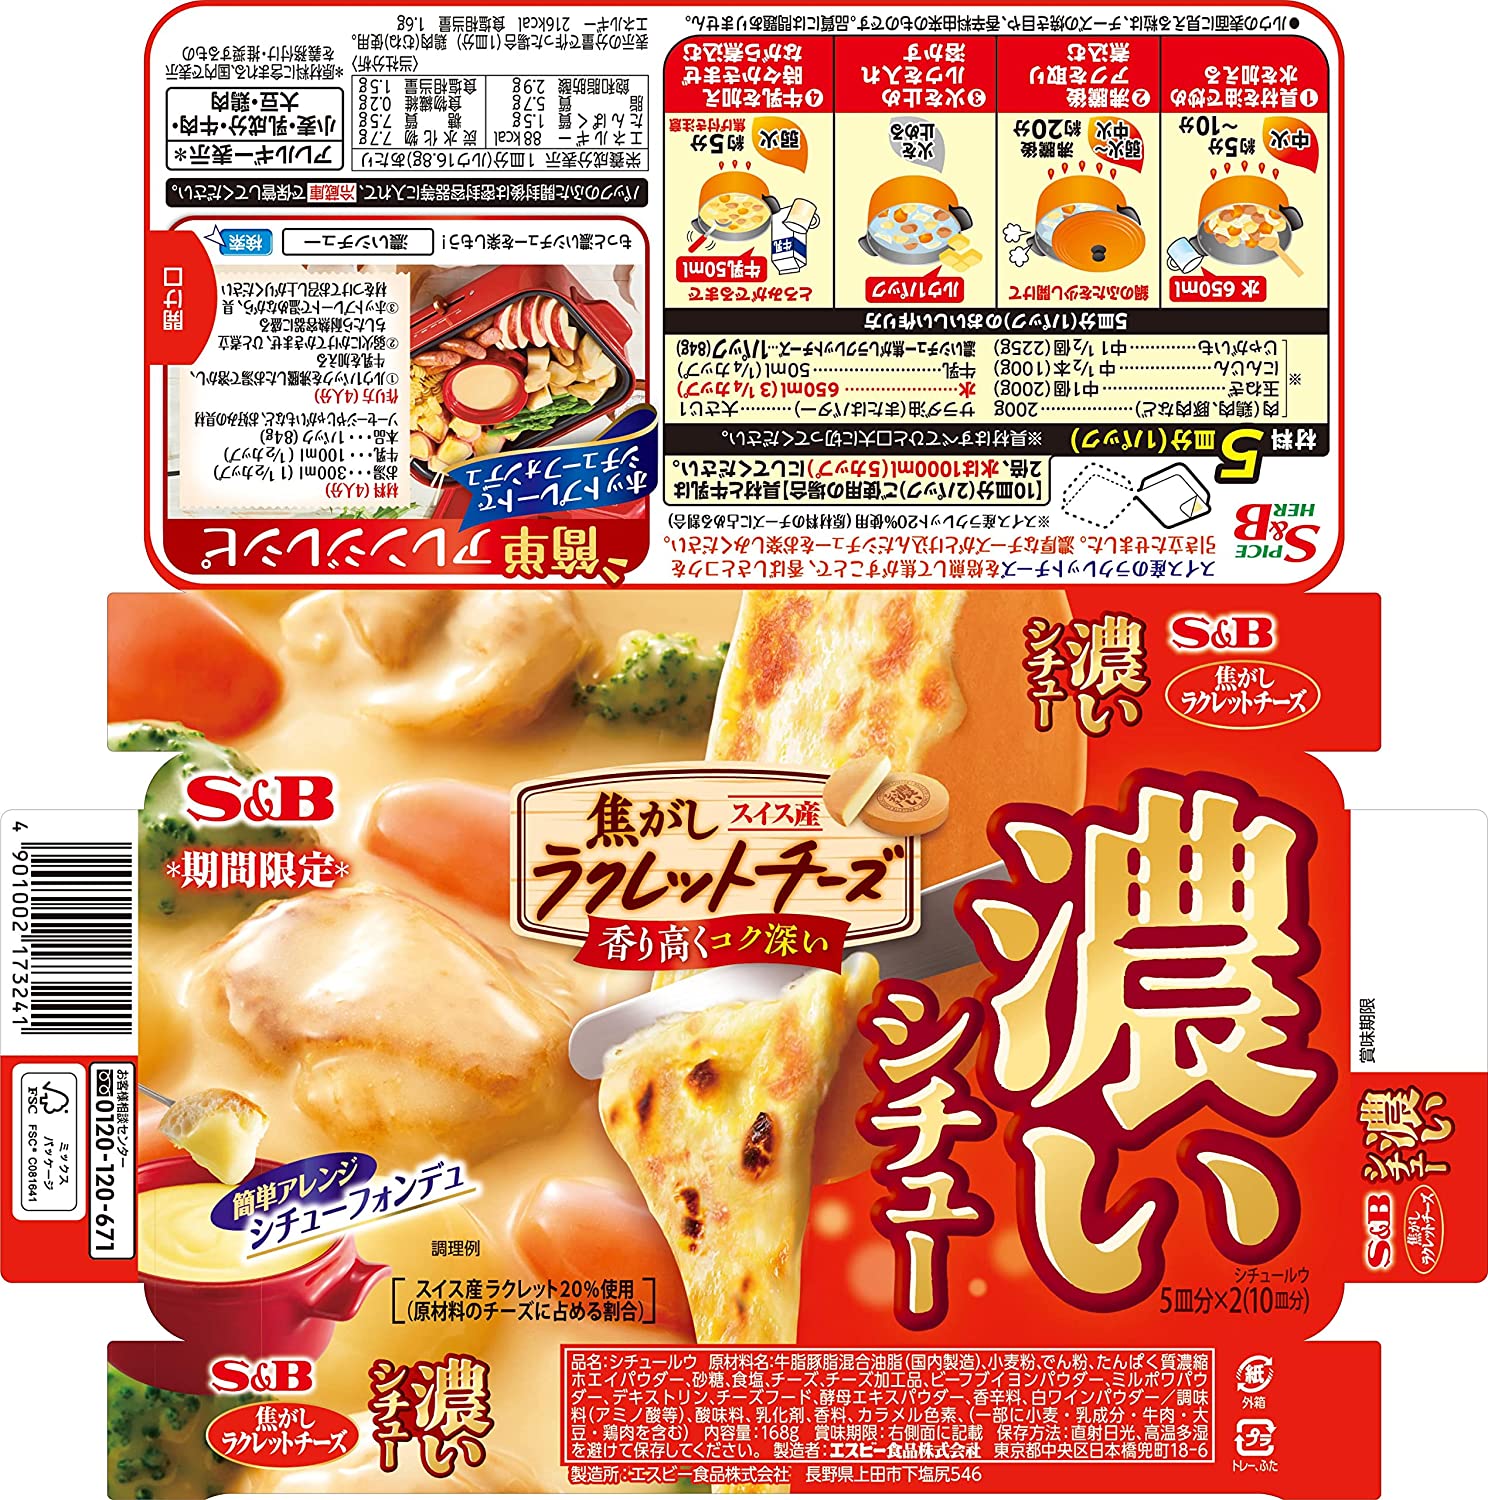 Japanese Popular food S & B Dark Stew Scorched Raclette Cheese 168g x 5 / 7810  画像2